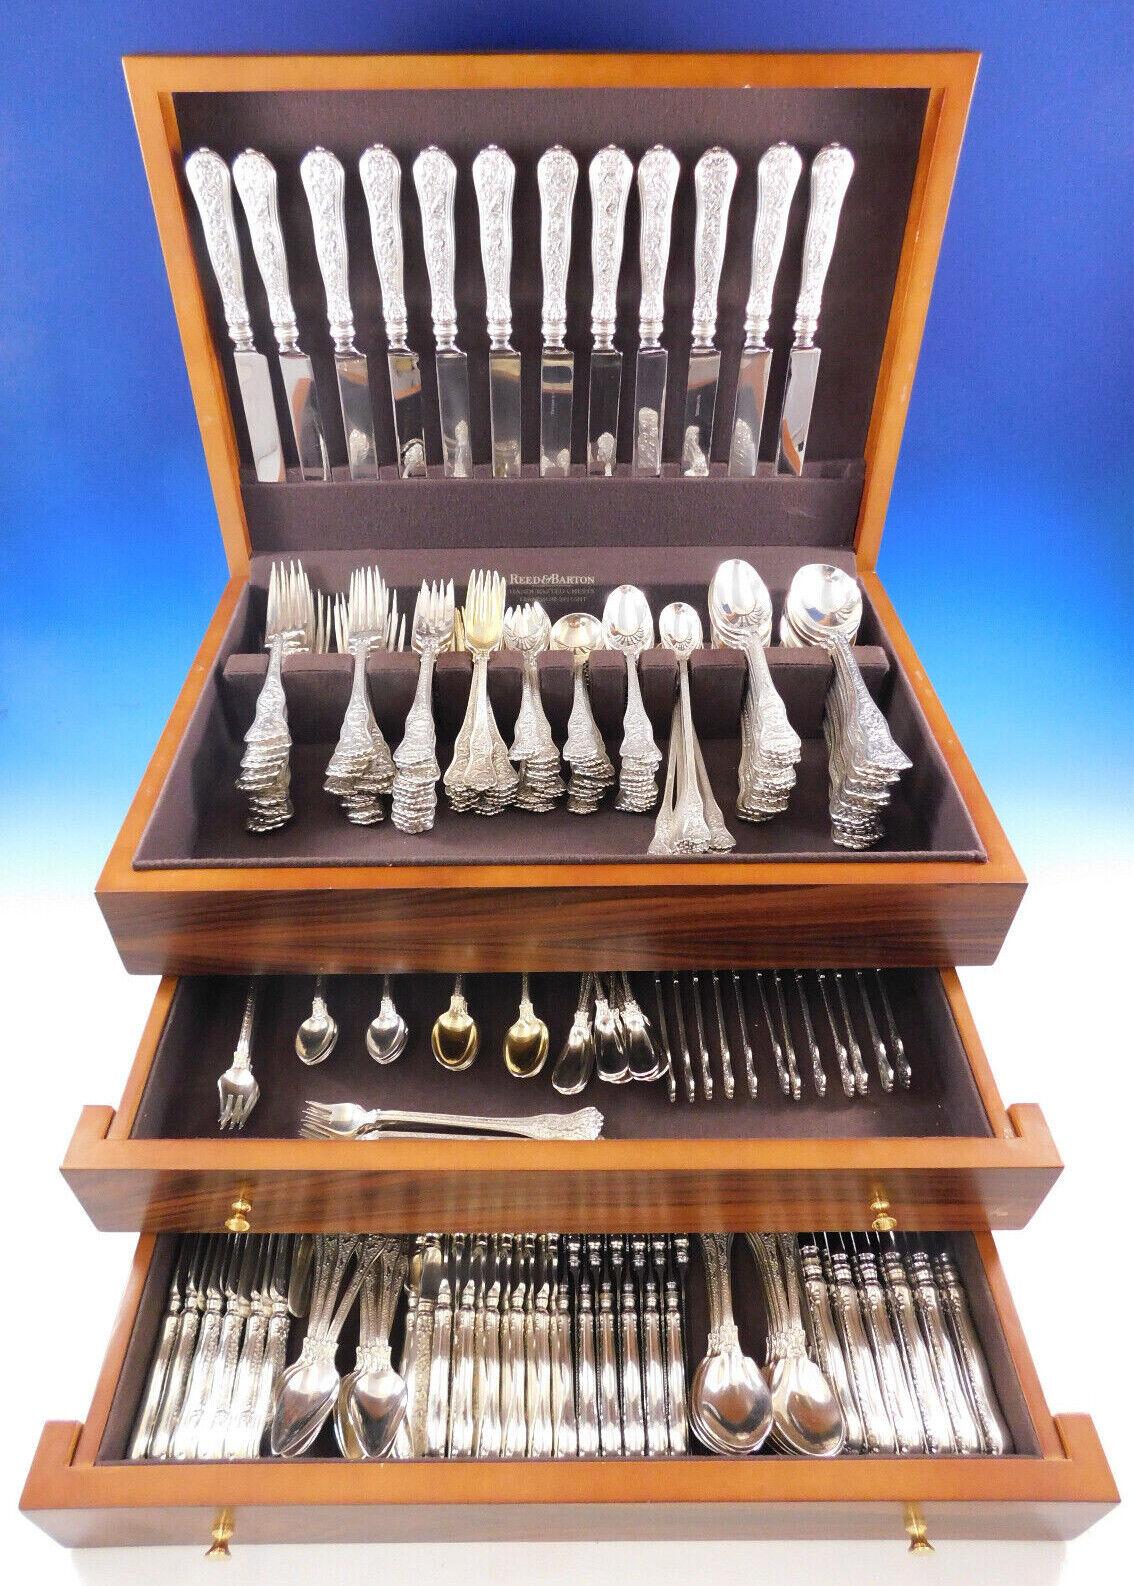 The incredible multi-motif Olympian pattern, which was introduced by Tiffany & Co. in 1878, is the most elaborate and complex of all Tiffany flatware designs. Each piece of Olympian is designed to illustrate a well-known story of Classical